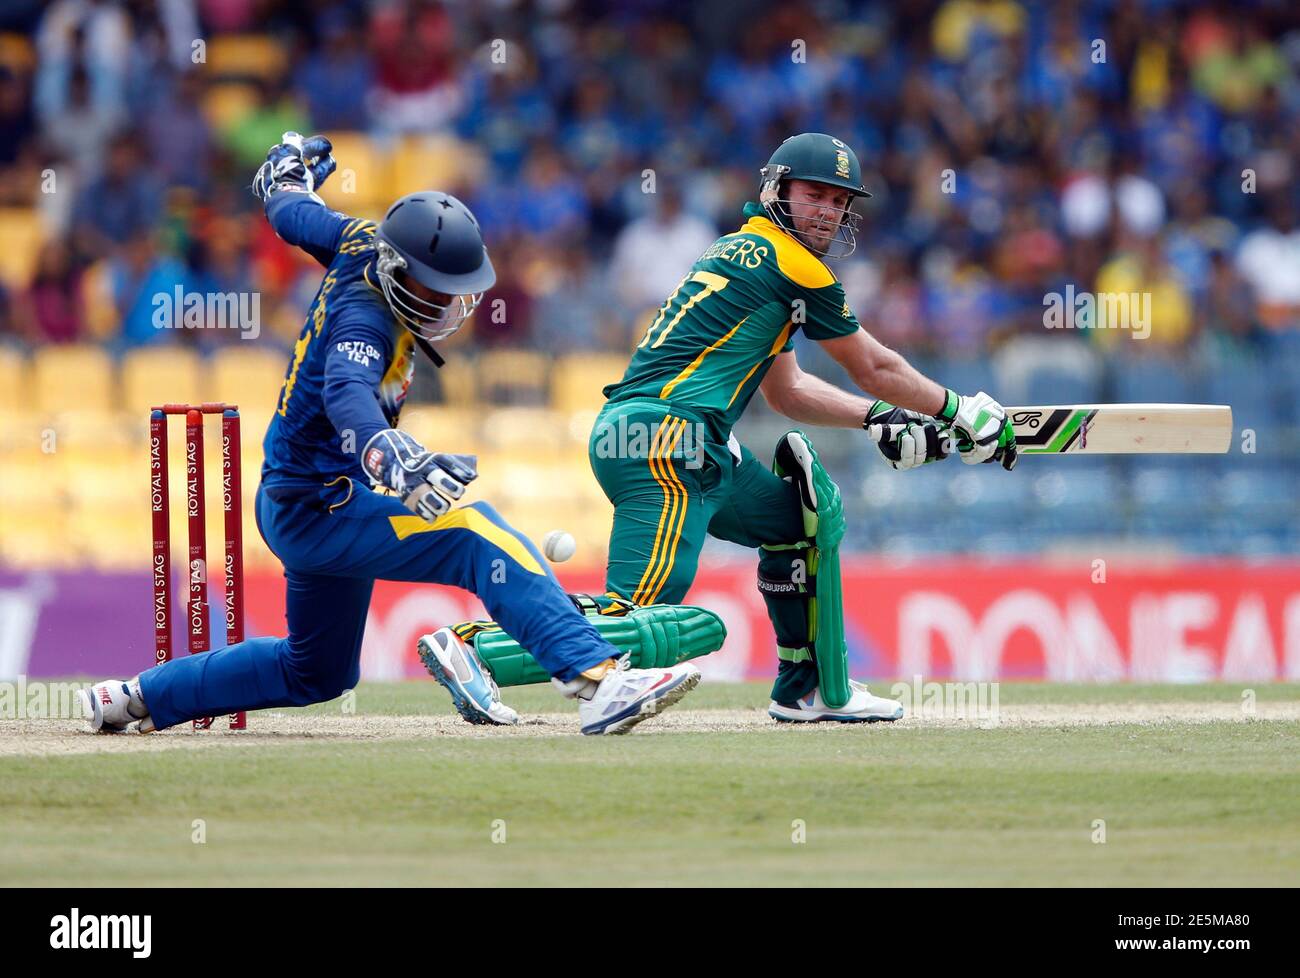 South Africa's captain AB de Villiers (R) plays a shot next to Sri Lanka's  Kumar Sangakkara during their first One Day International cricket match in  Colombo July 6, 2014. REUTERS/Dinuka Liyanawatte (SRI